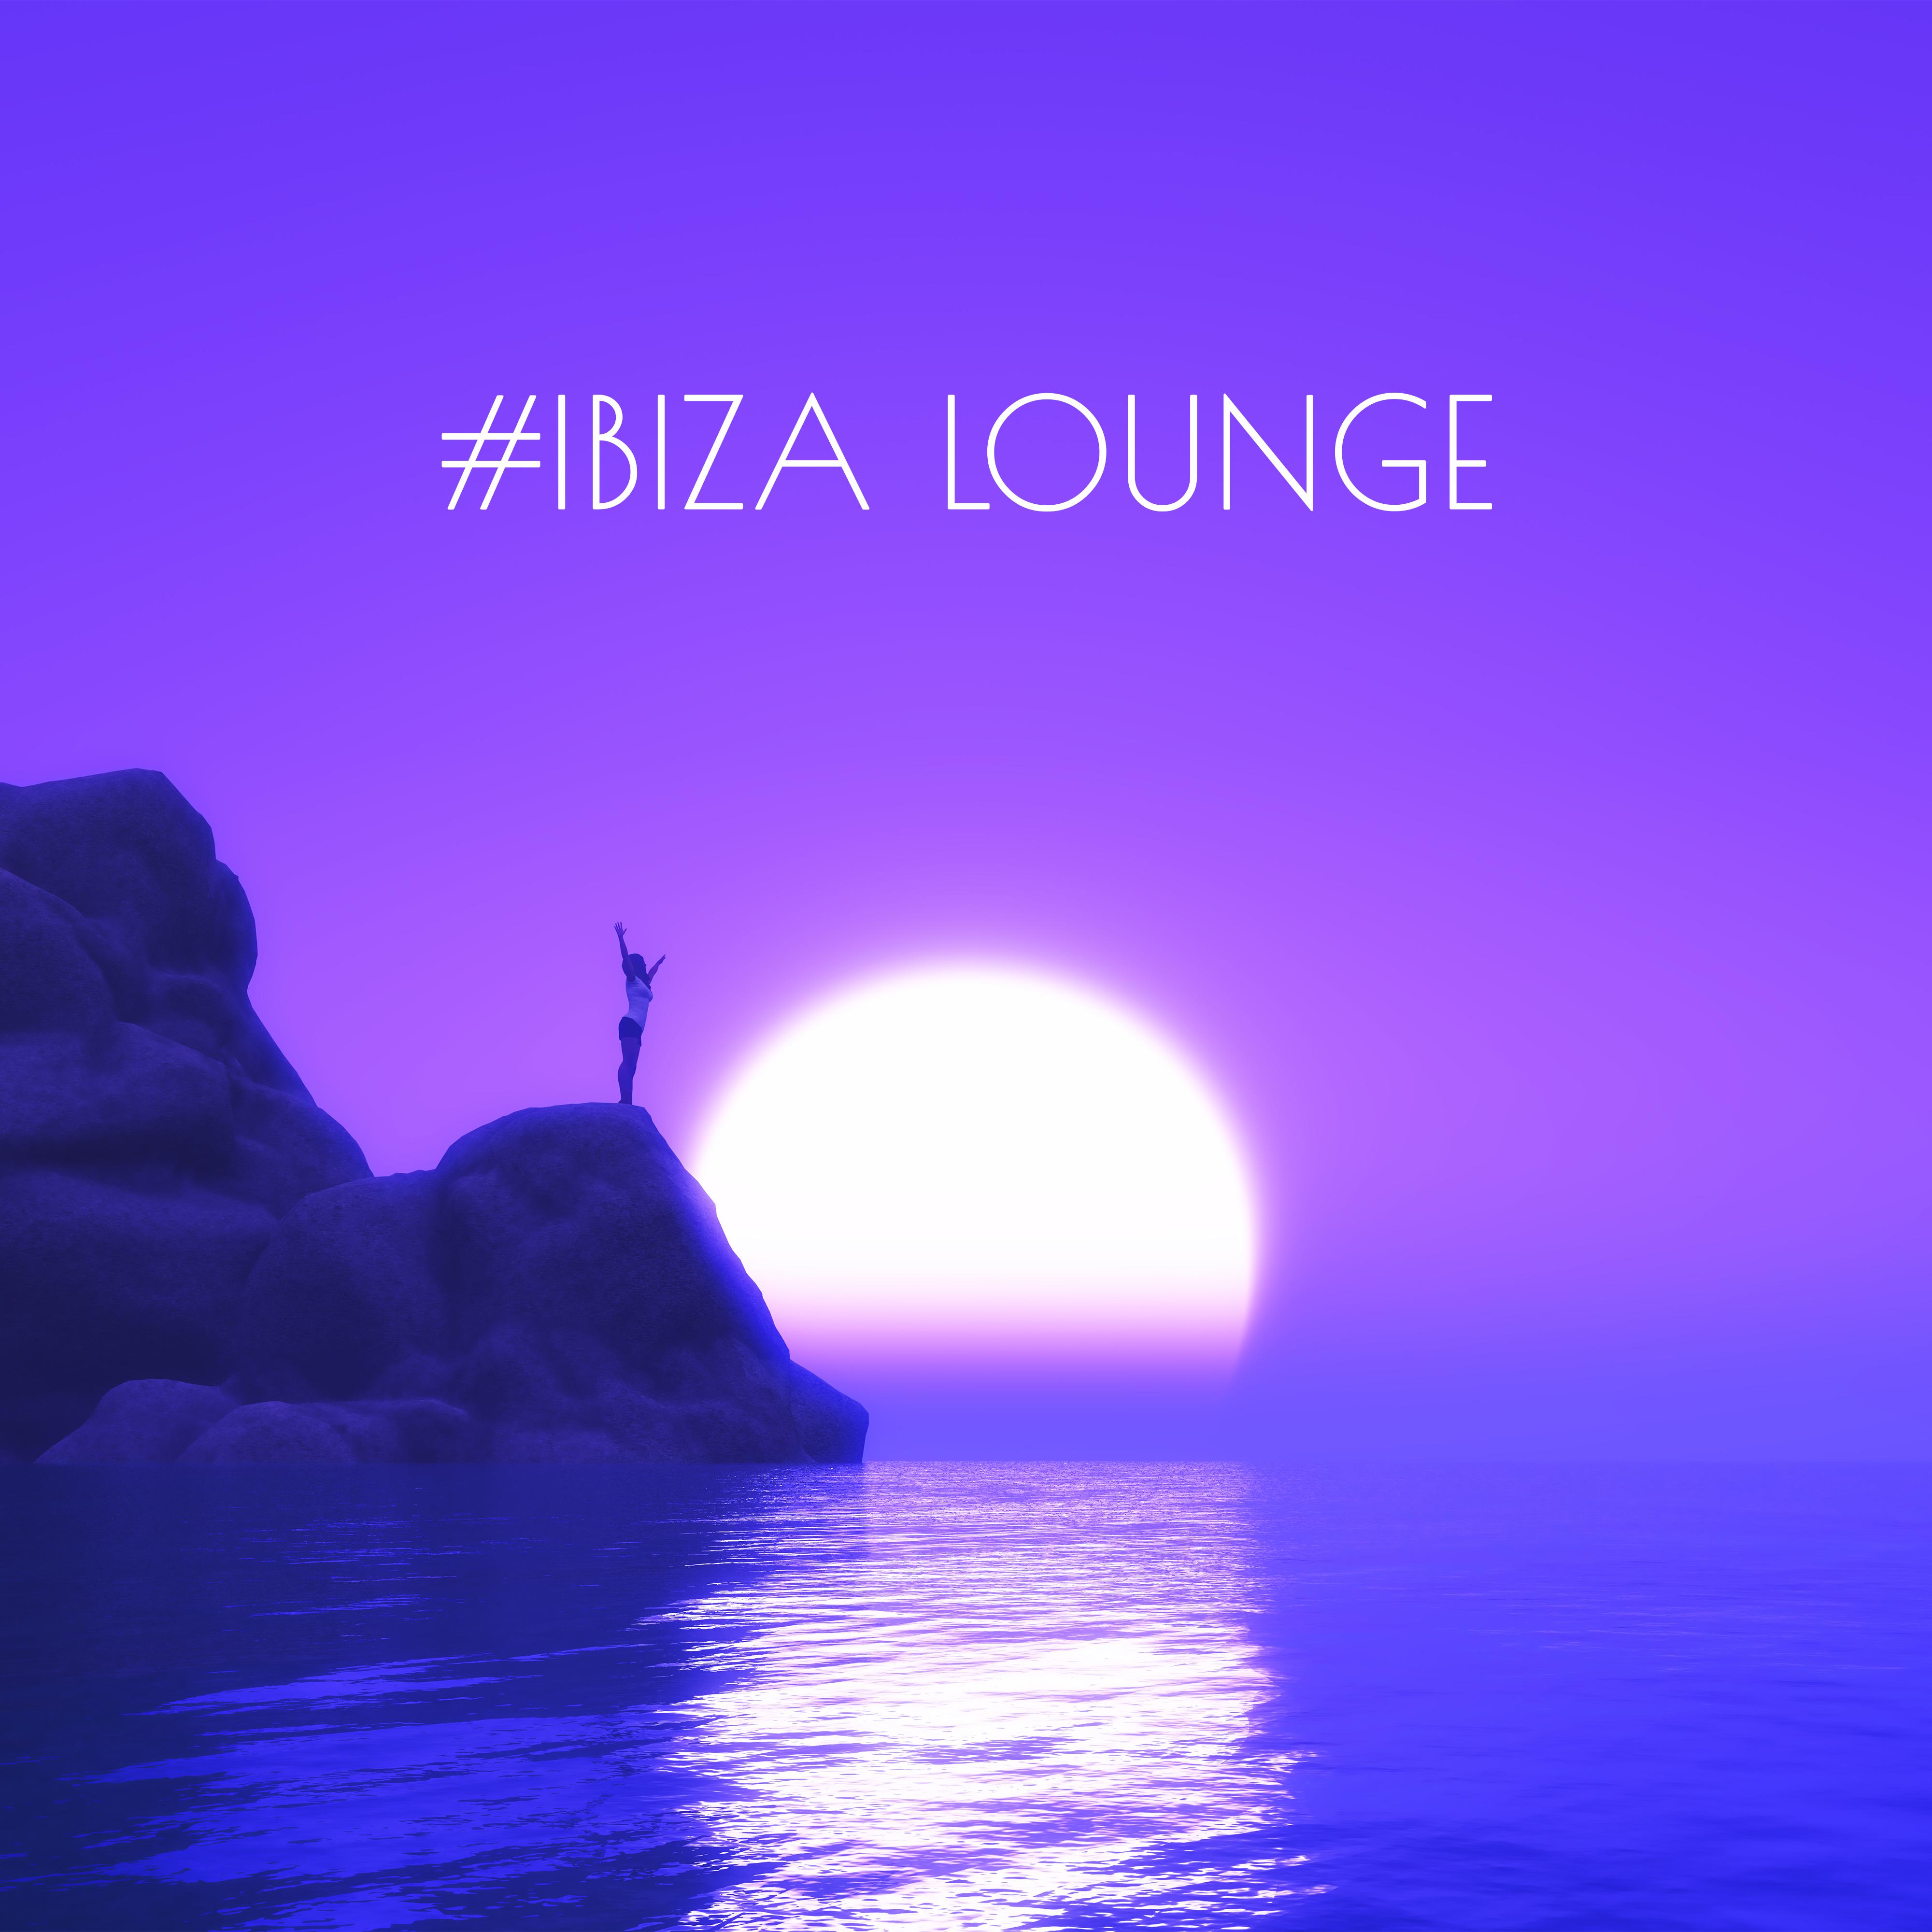 #Ibiza Lounge: Chill Out 2019, Music Zone, Lounge Chillout Bar, Summer Music, Beach Chill, Relax, Rest, Modern Sounds to Calm Down